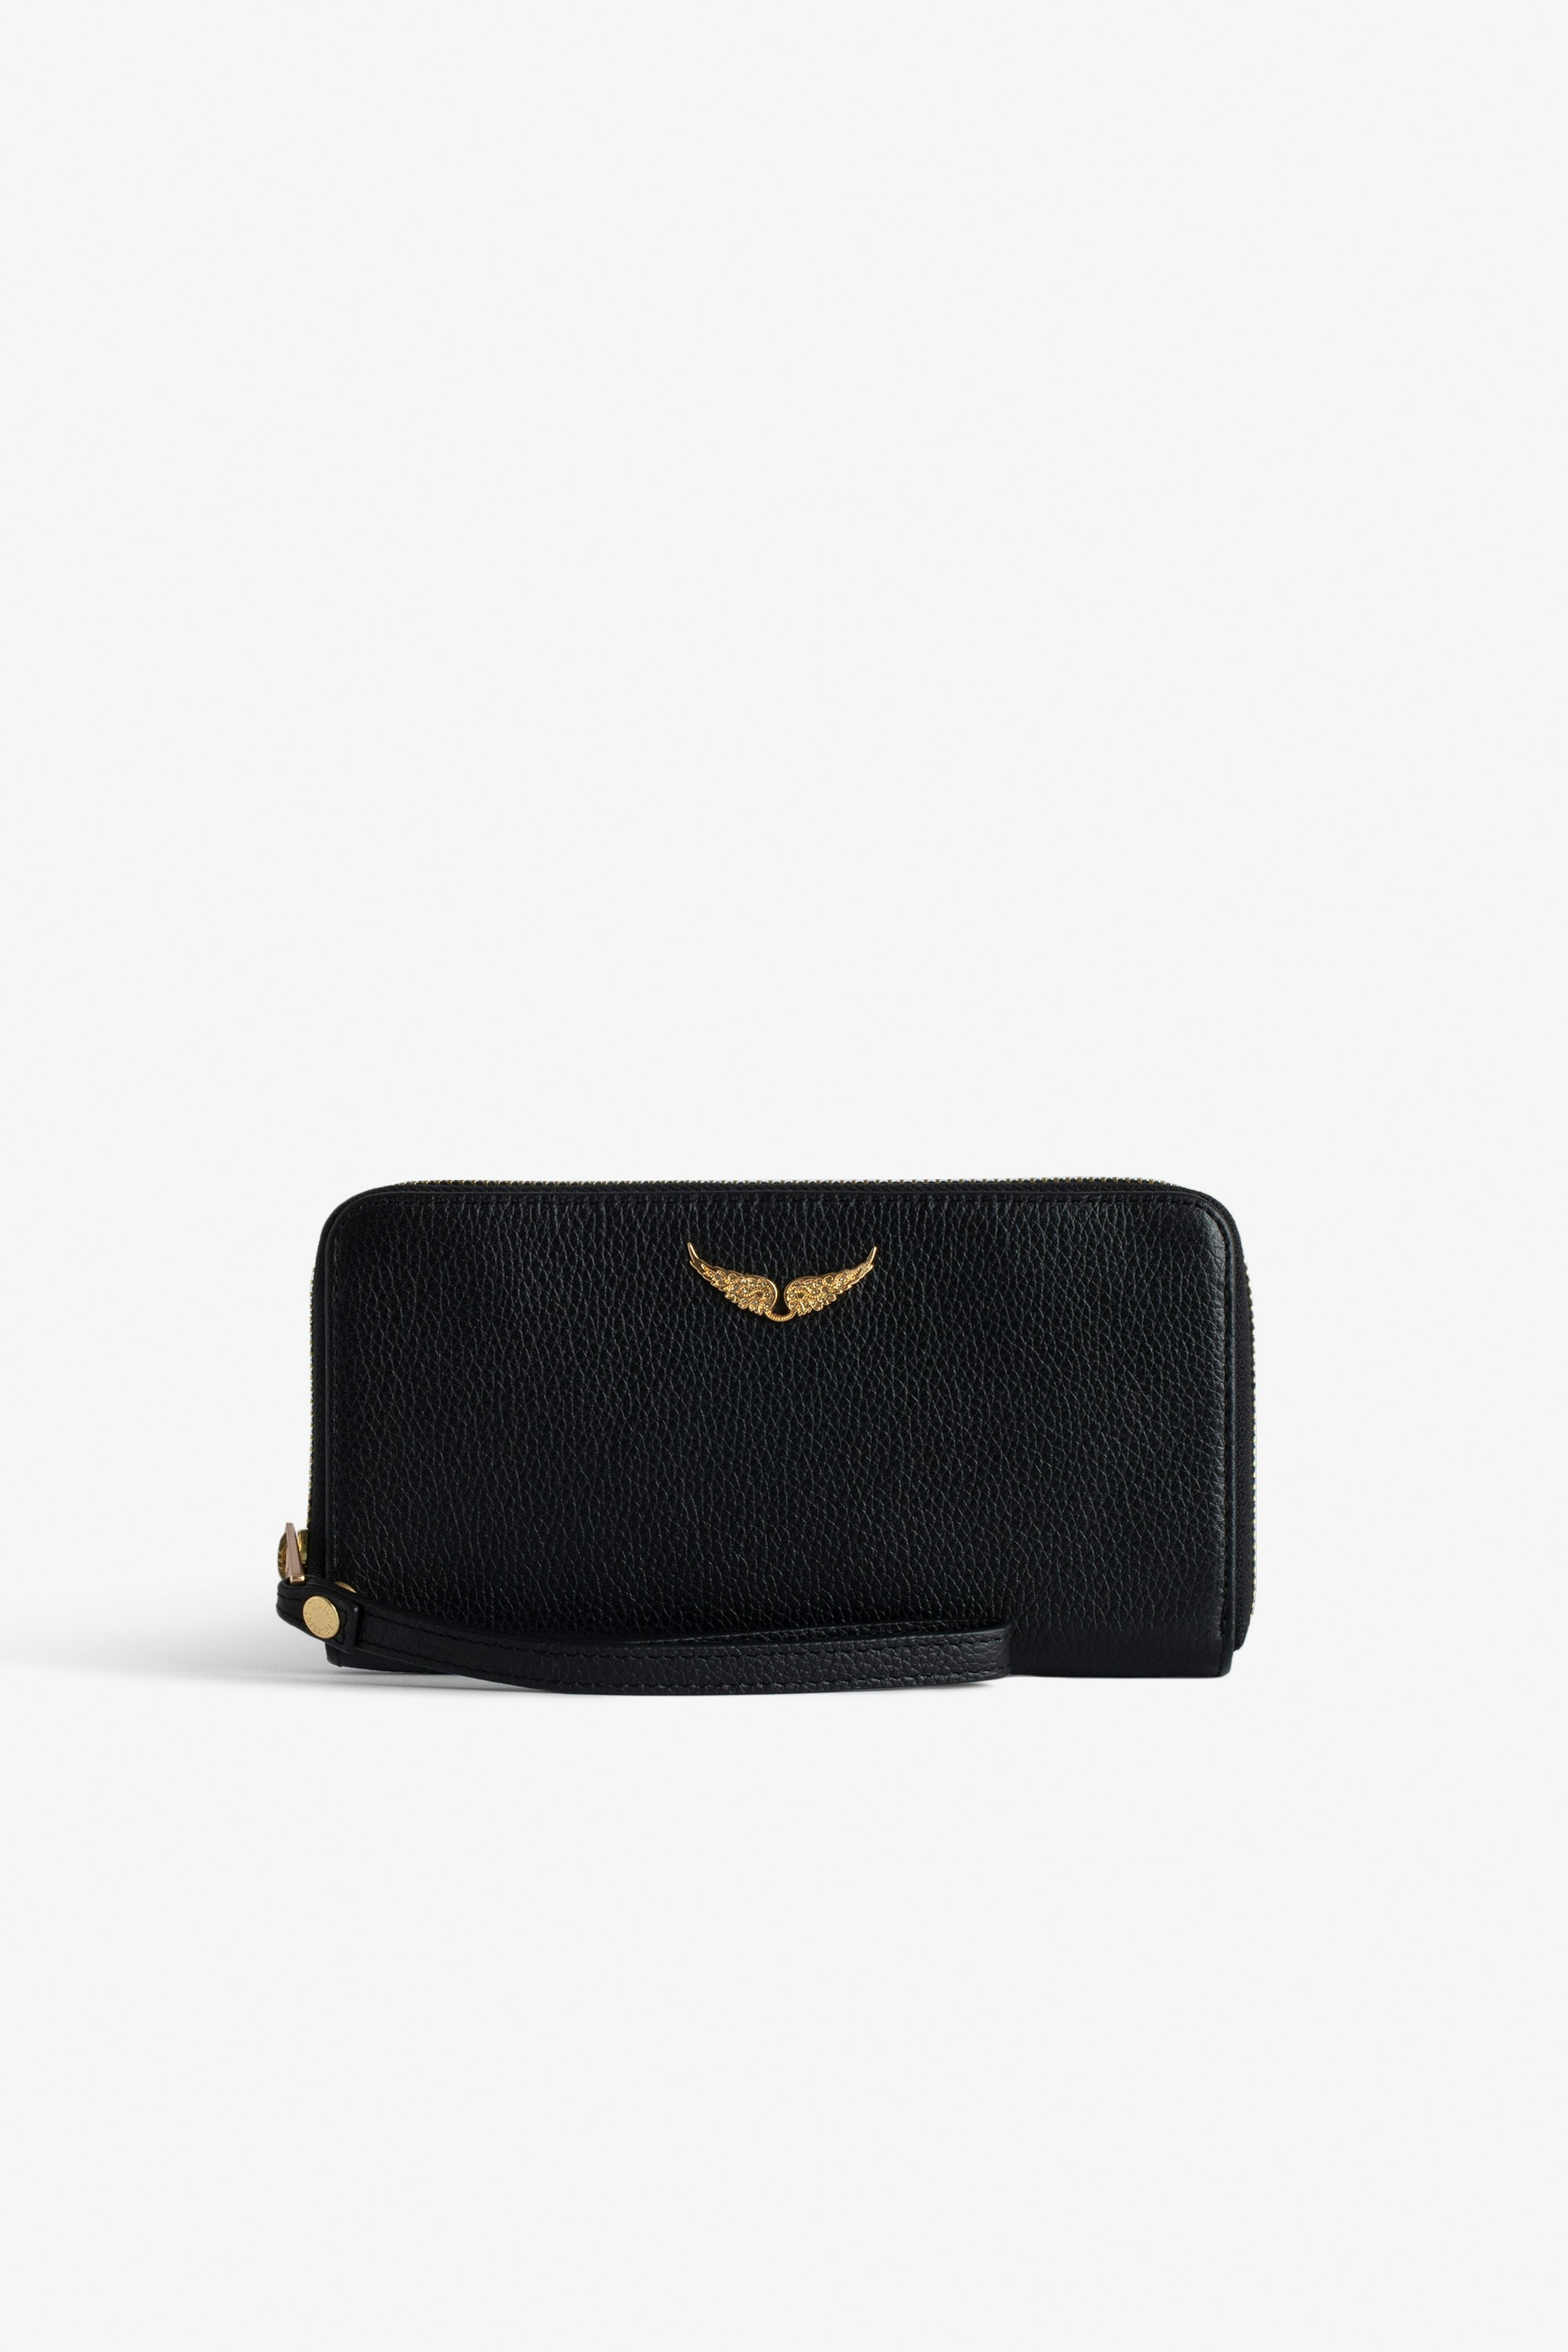 Compagnon Wallet Women’s black grained leather wallet with wings charm.